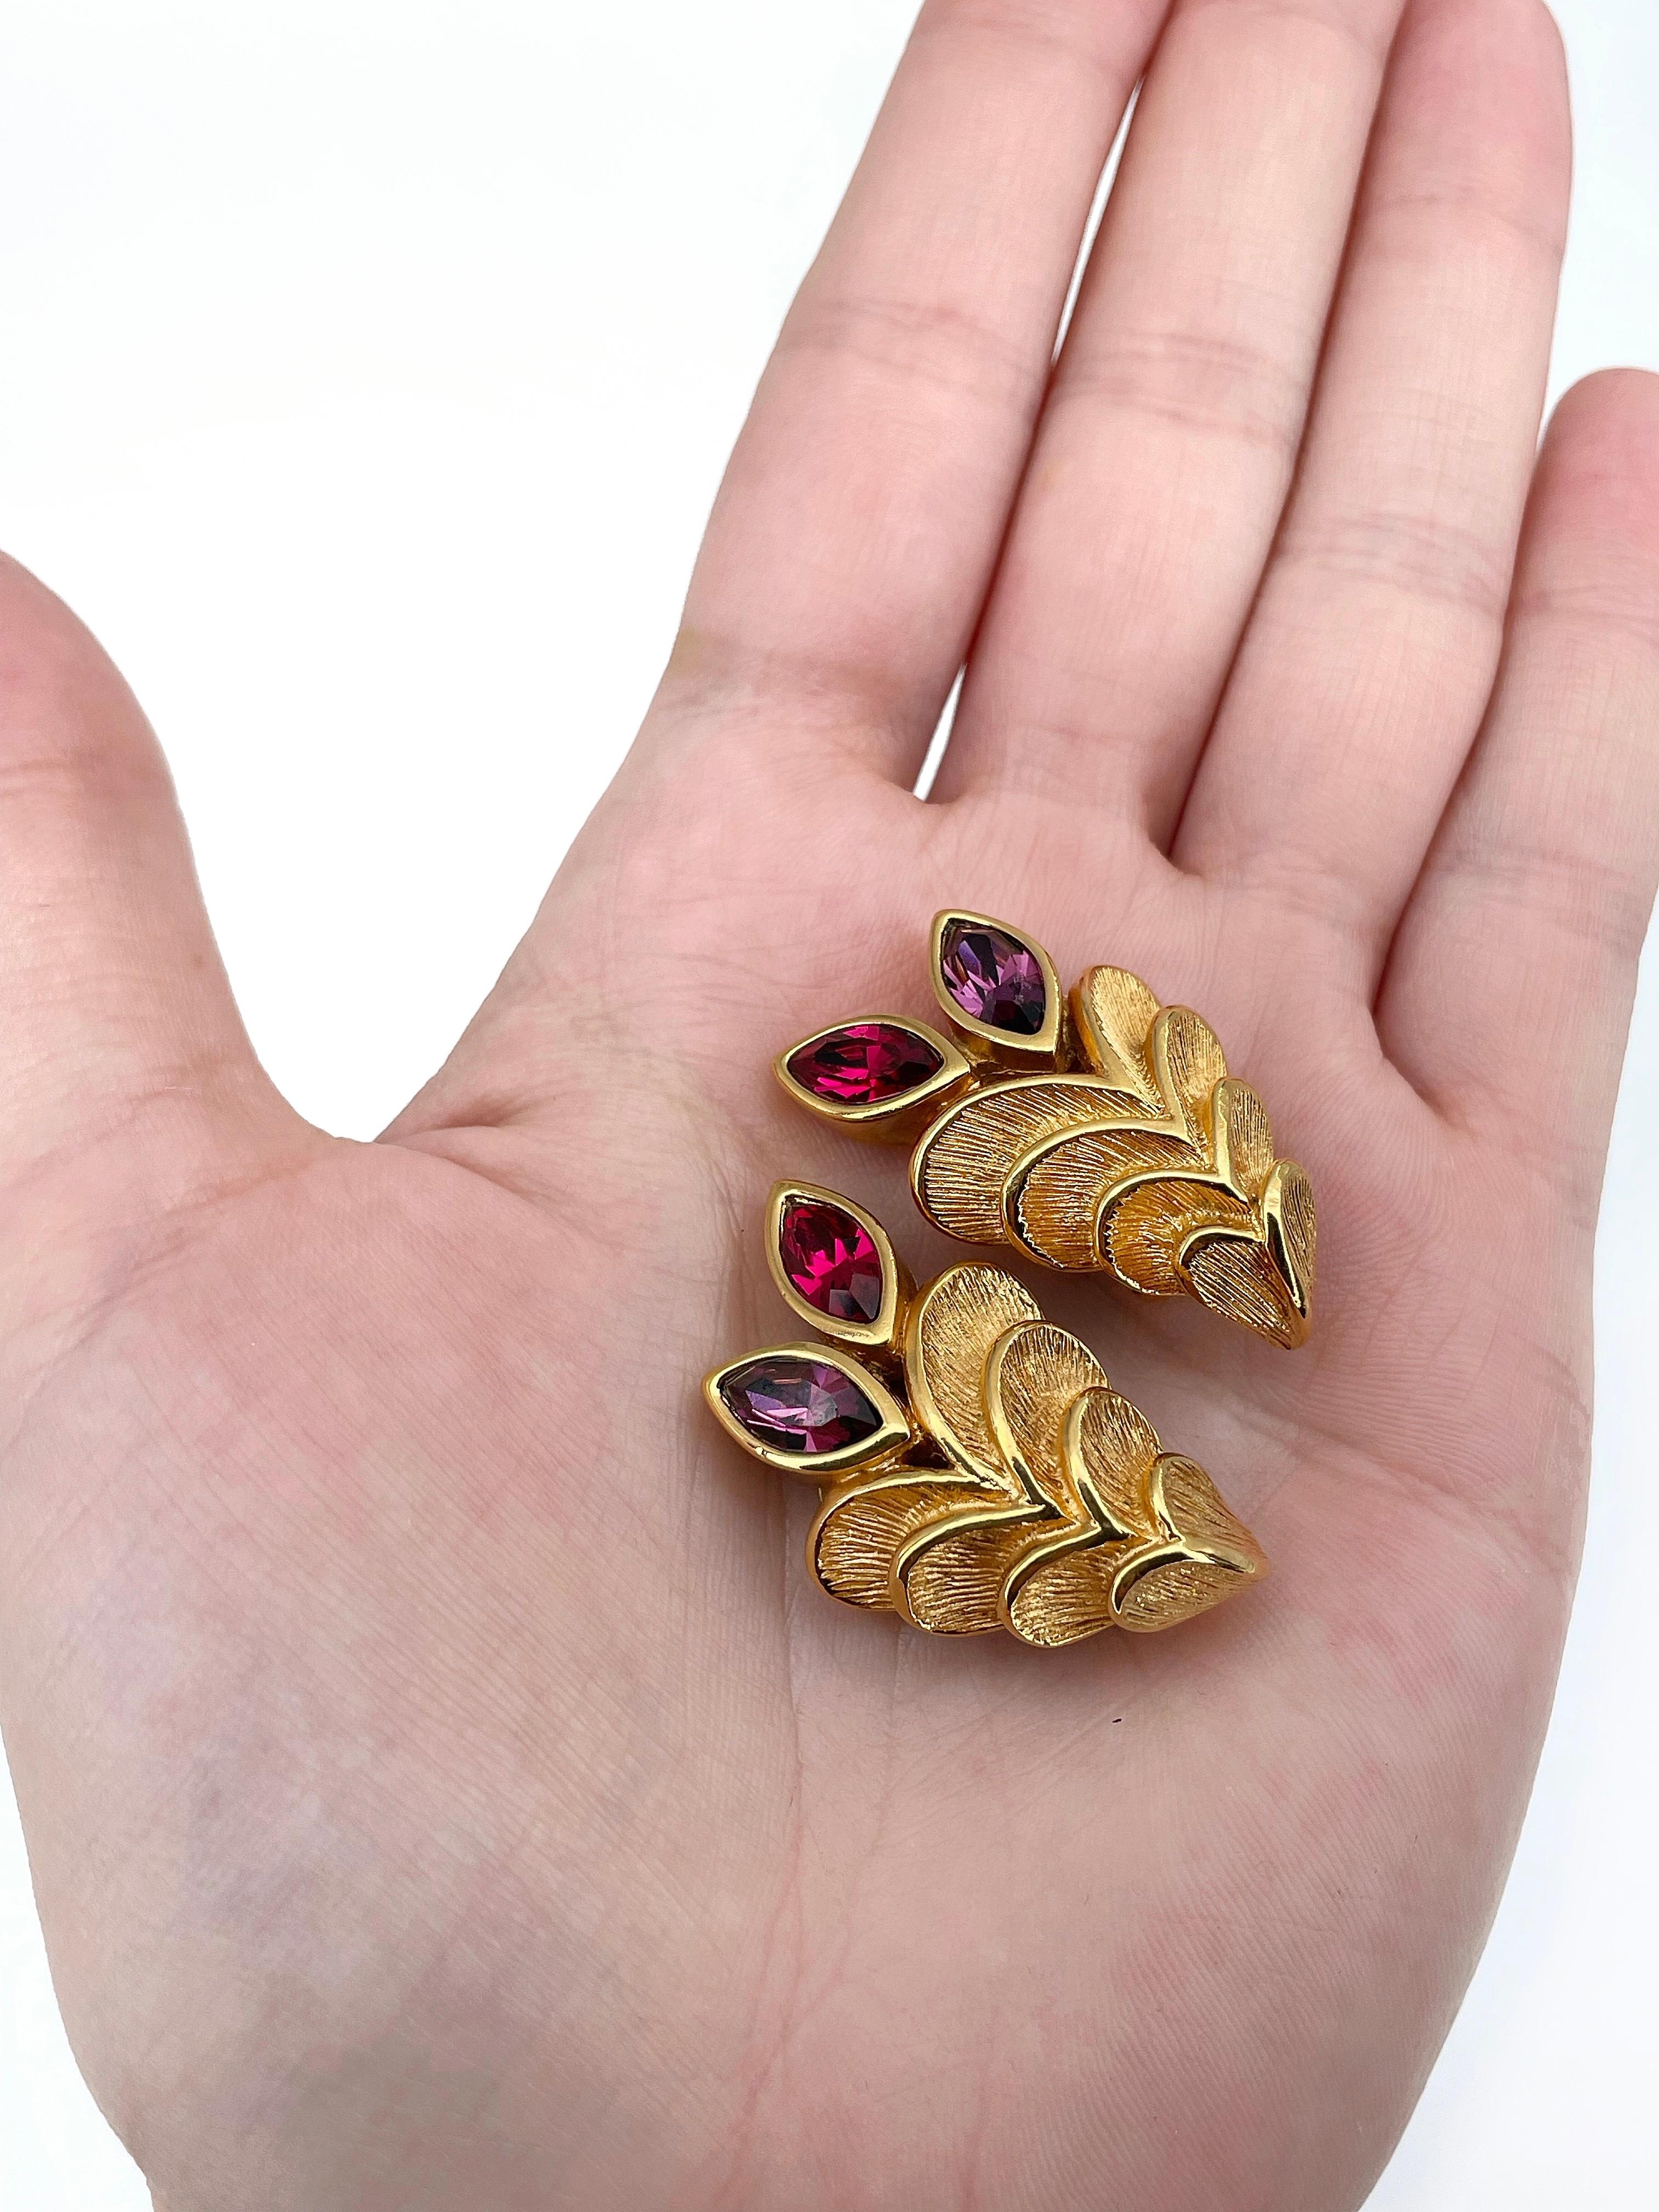 This is a beautifully crafted gold tone floral clip on earrings designed by Lanvin in 1980’s. This piece is gold plated. It features red and purple rhinestones.

Signature: “LANVIN. GERMANY” (shown in photos).

Size: 3.7x2.3cm

———

If you have any